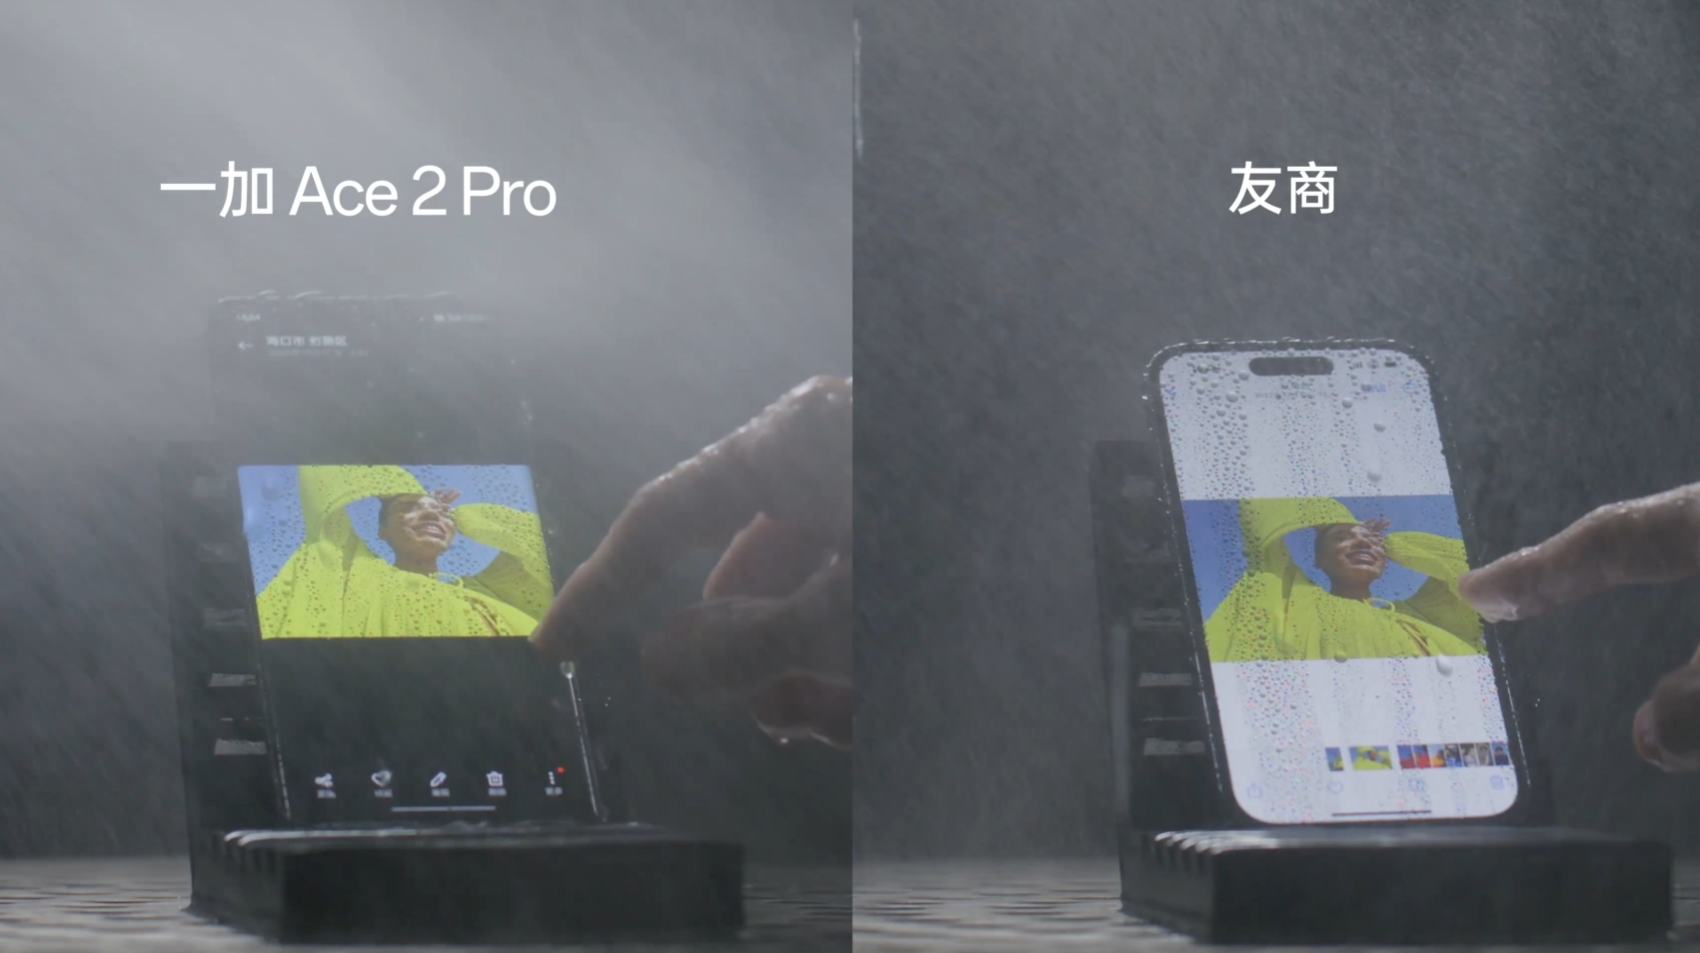 A video still showing the OnePlus Ace 2 Pro being used in fog